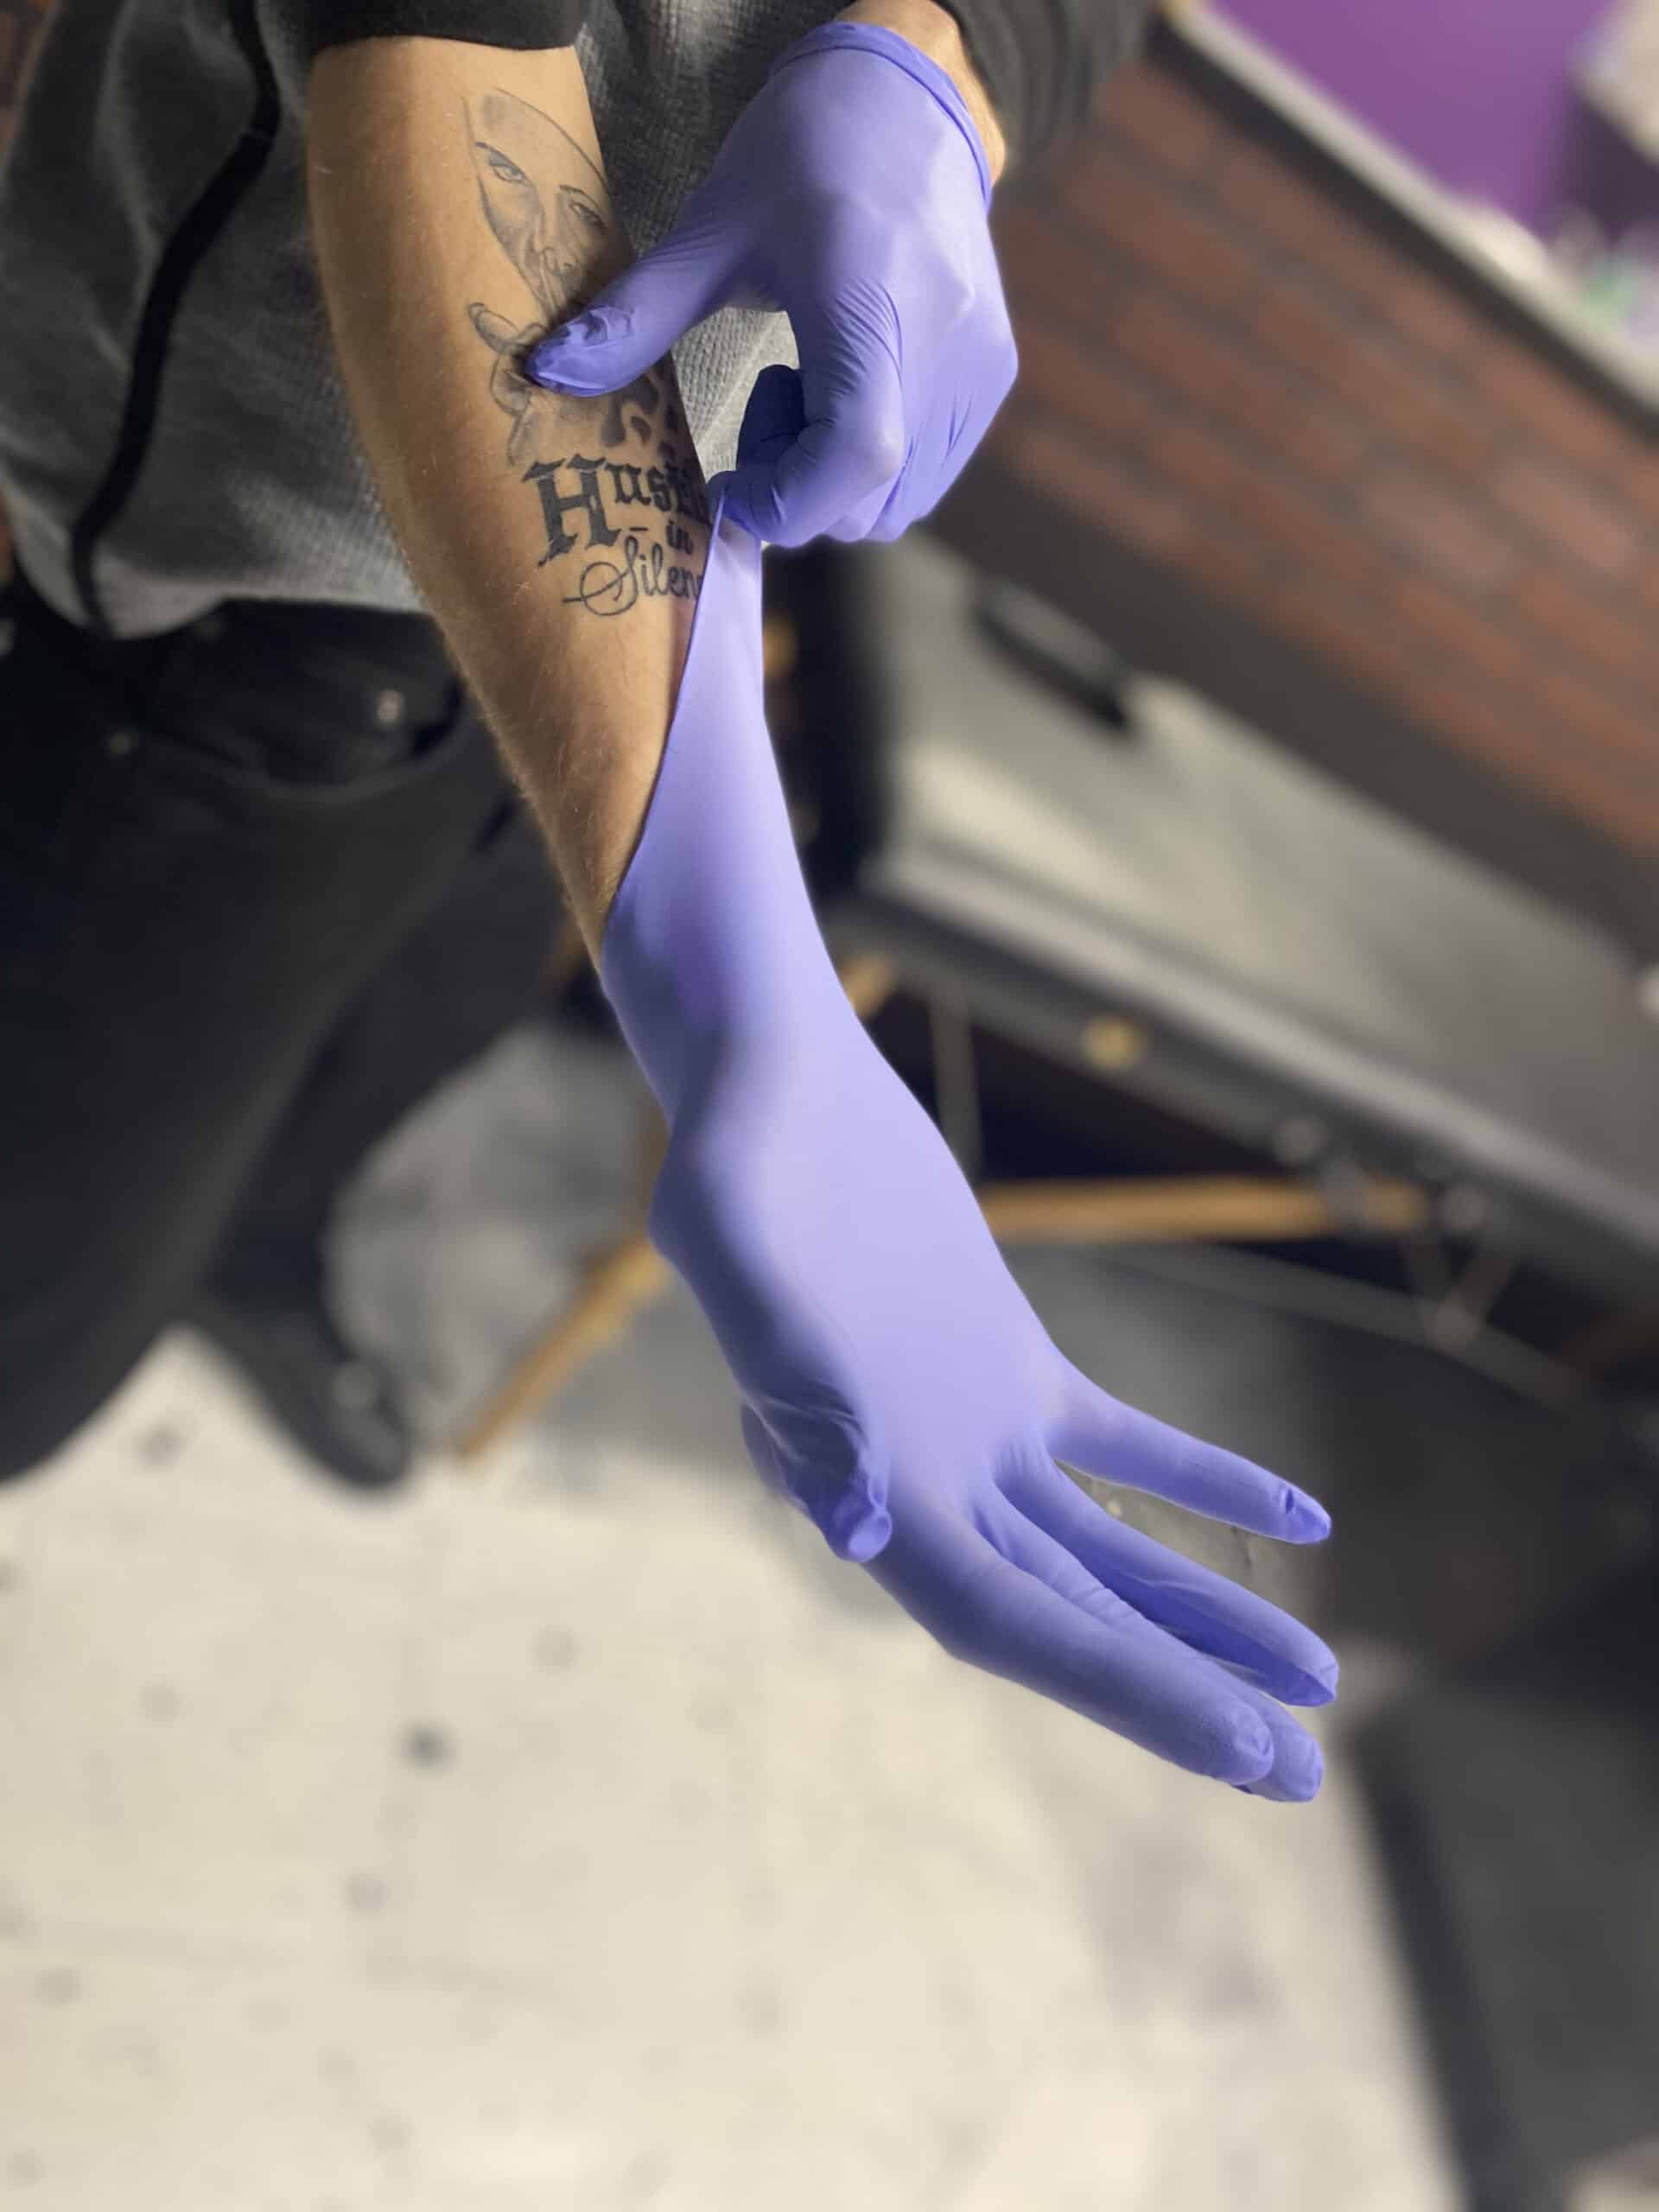 tattoo parlor Hygiene Practices